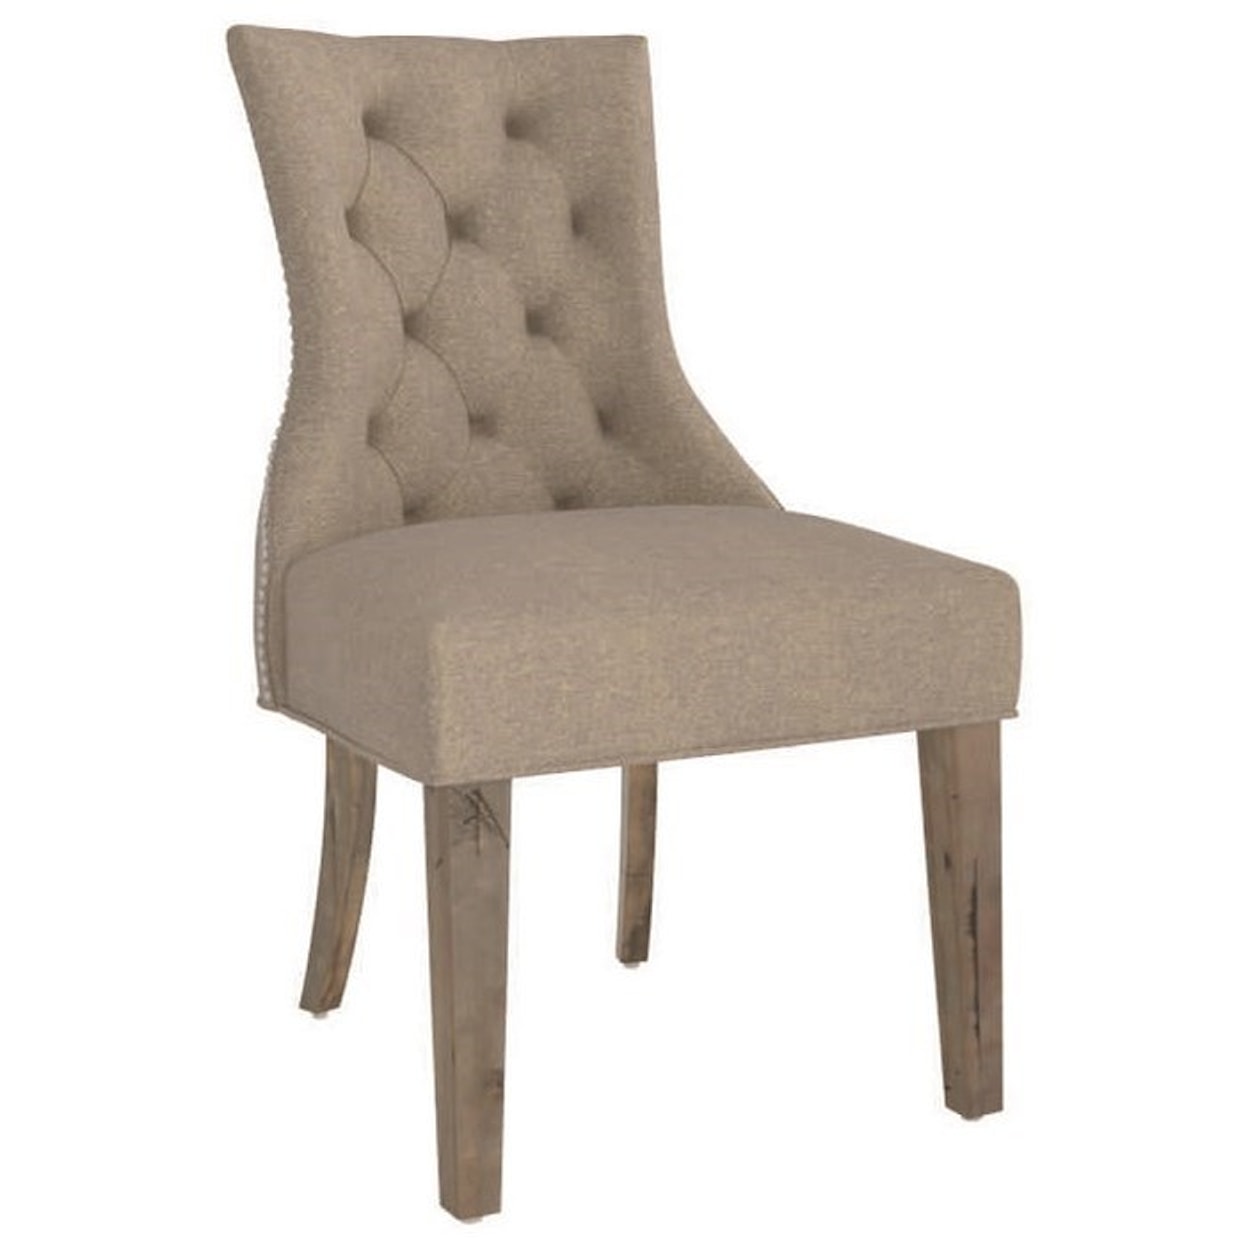 Canadel Champlain Customizable Side Chair with Nailhead Trim